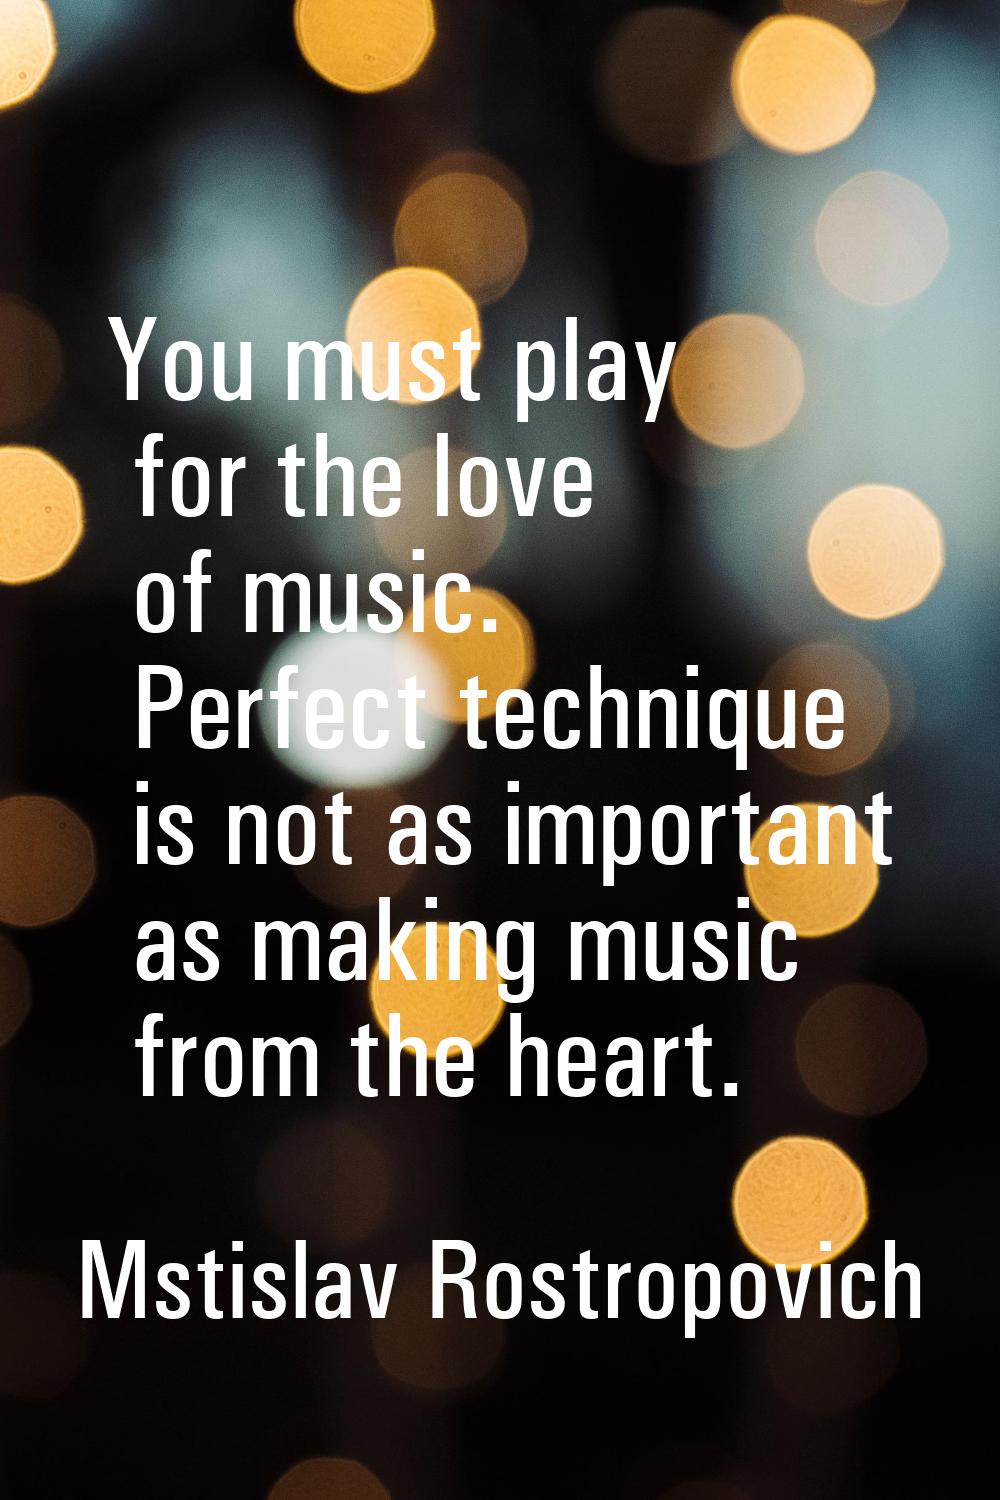 You must play for the love of music. Perfect technique is not as important as making music from the